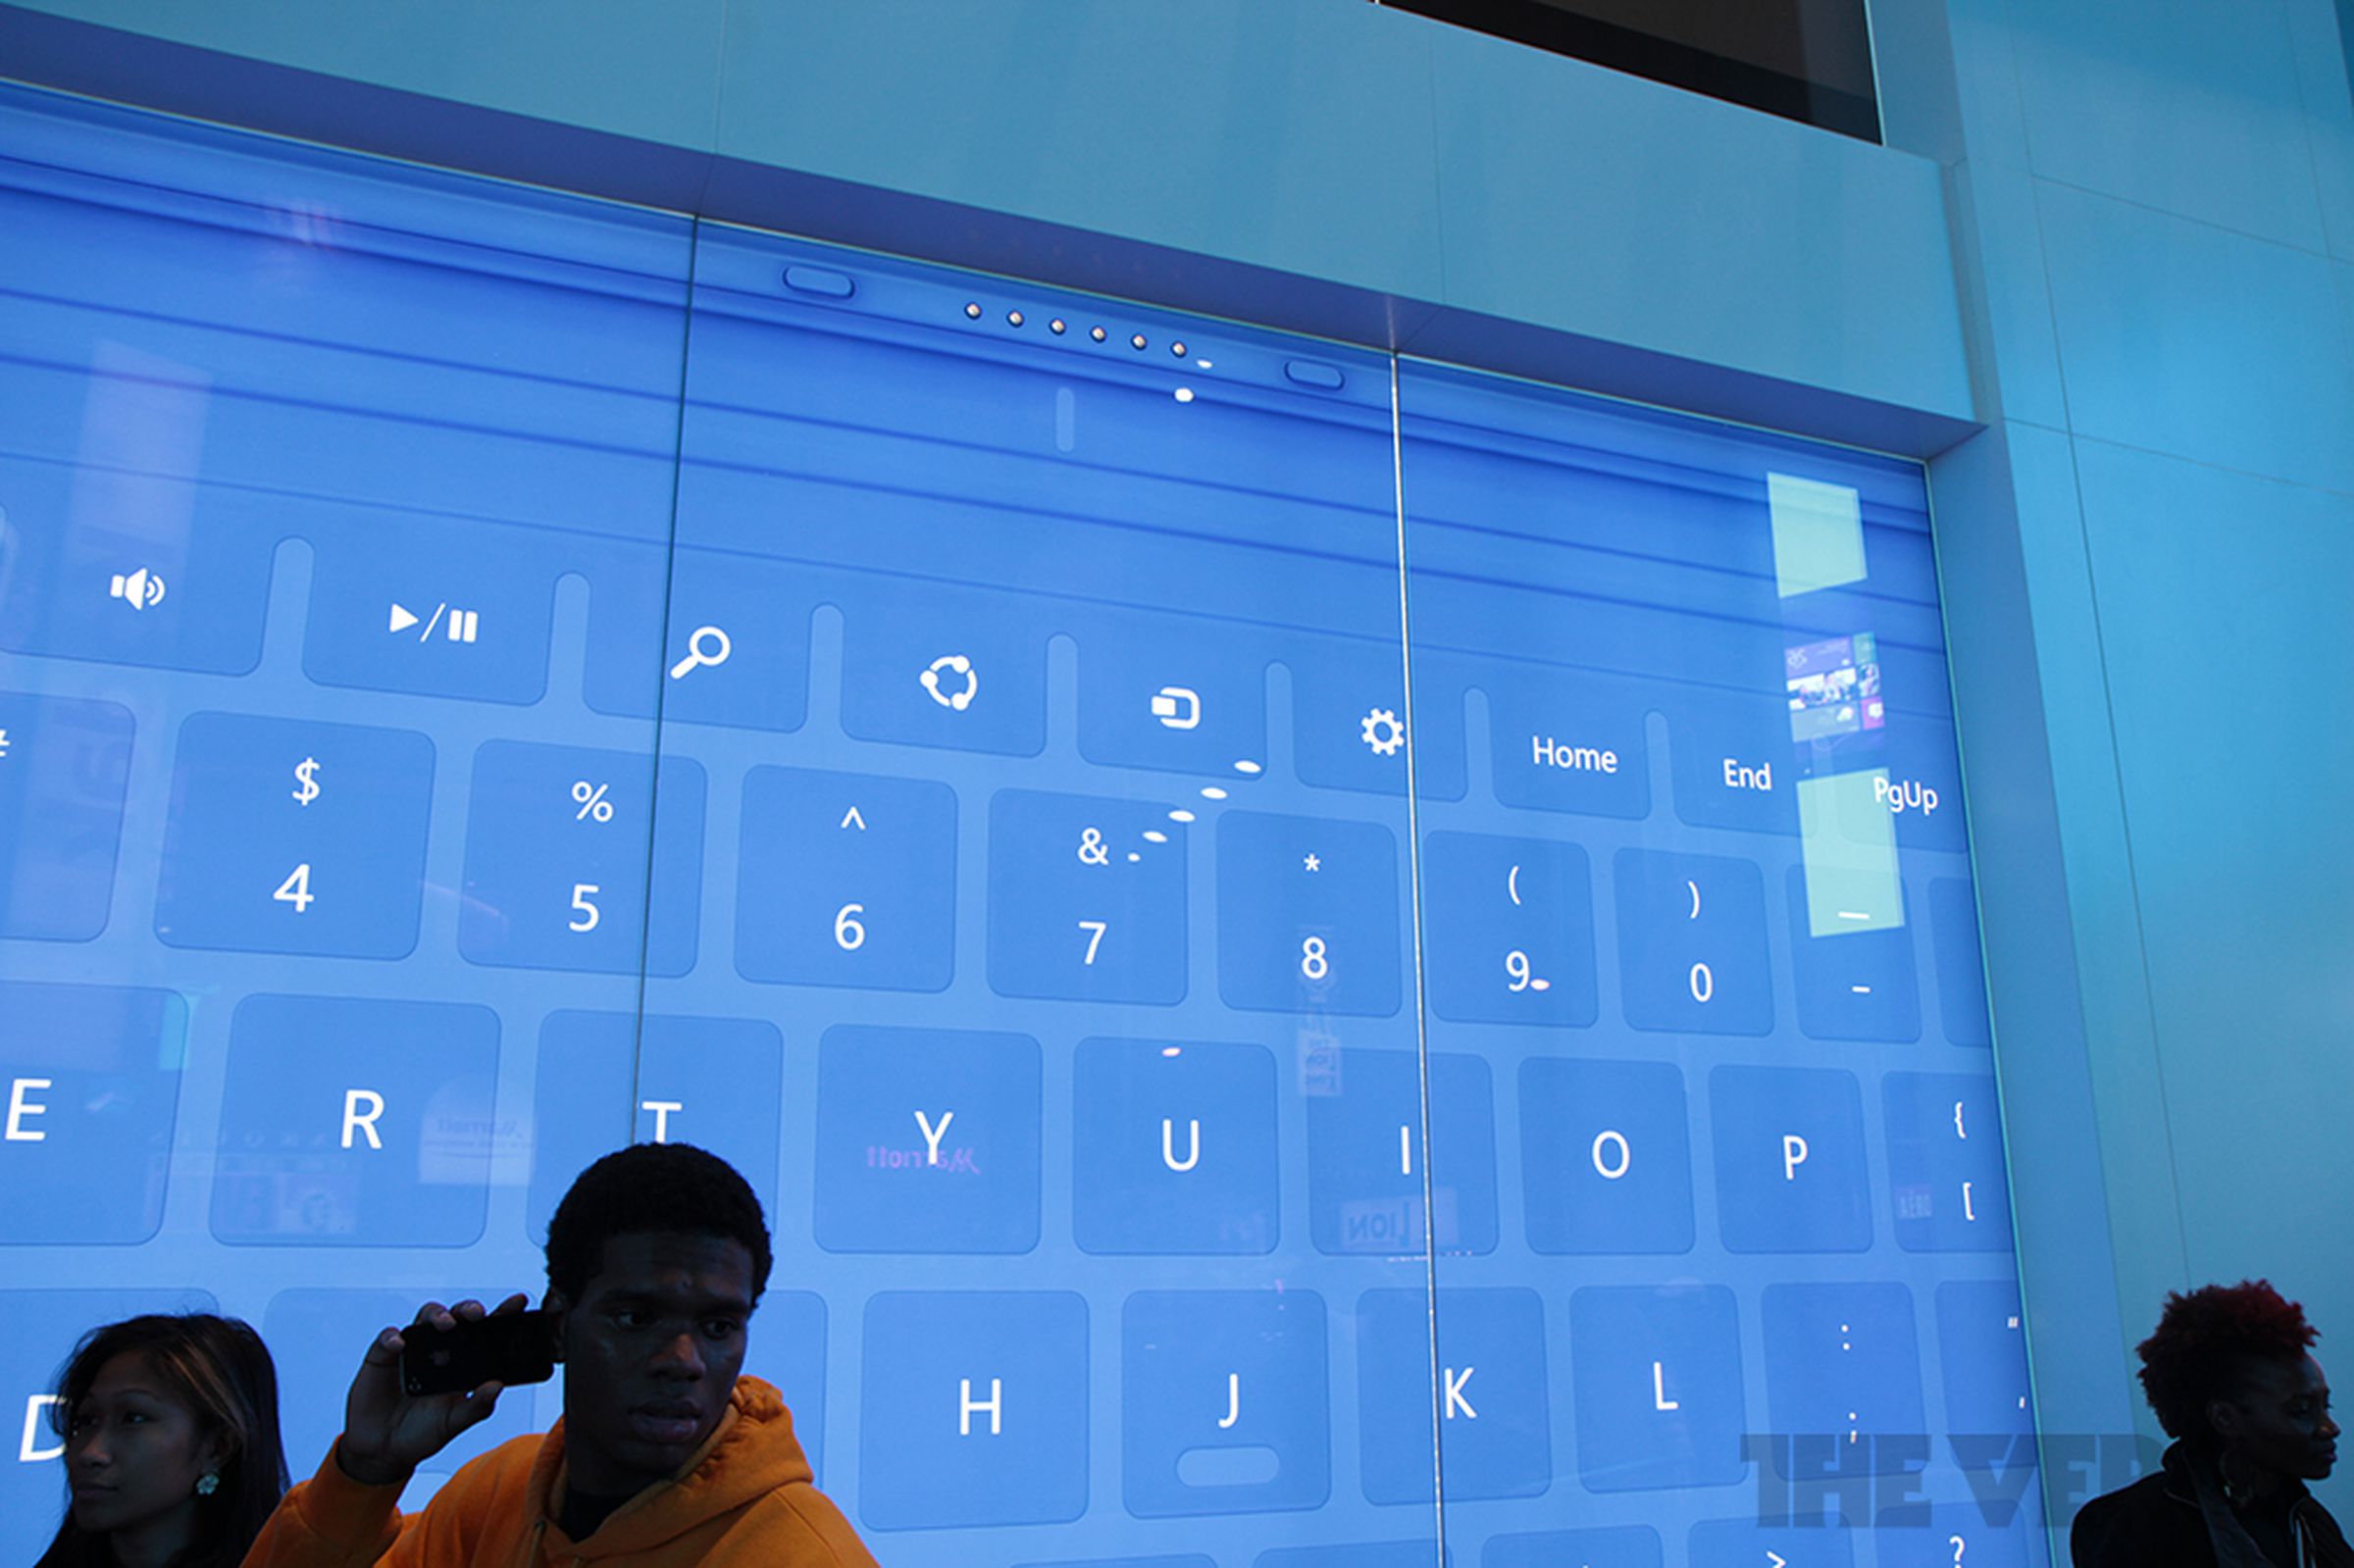 Microsoft Surface launch pictures